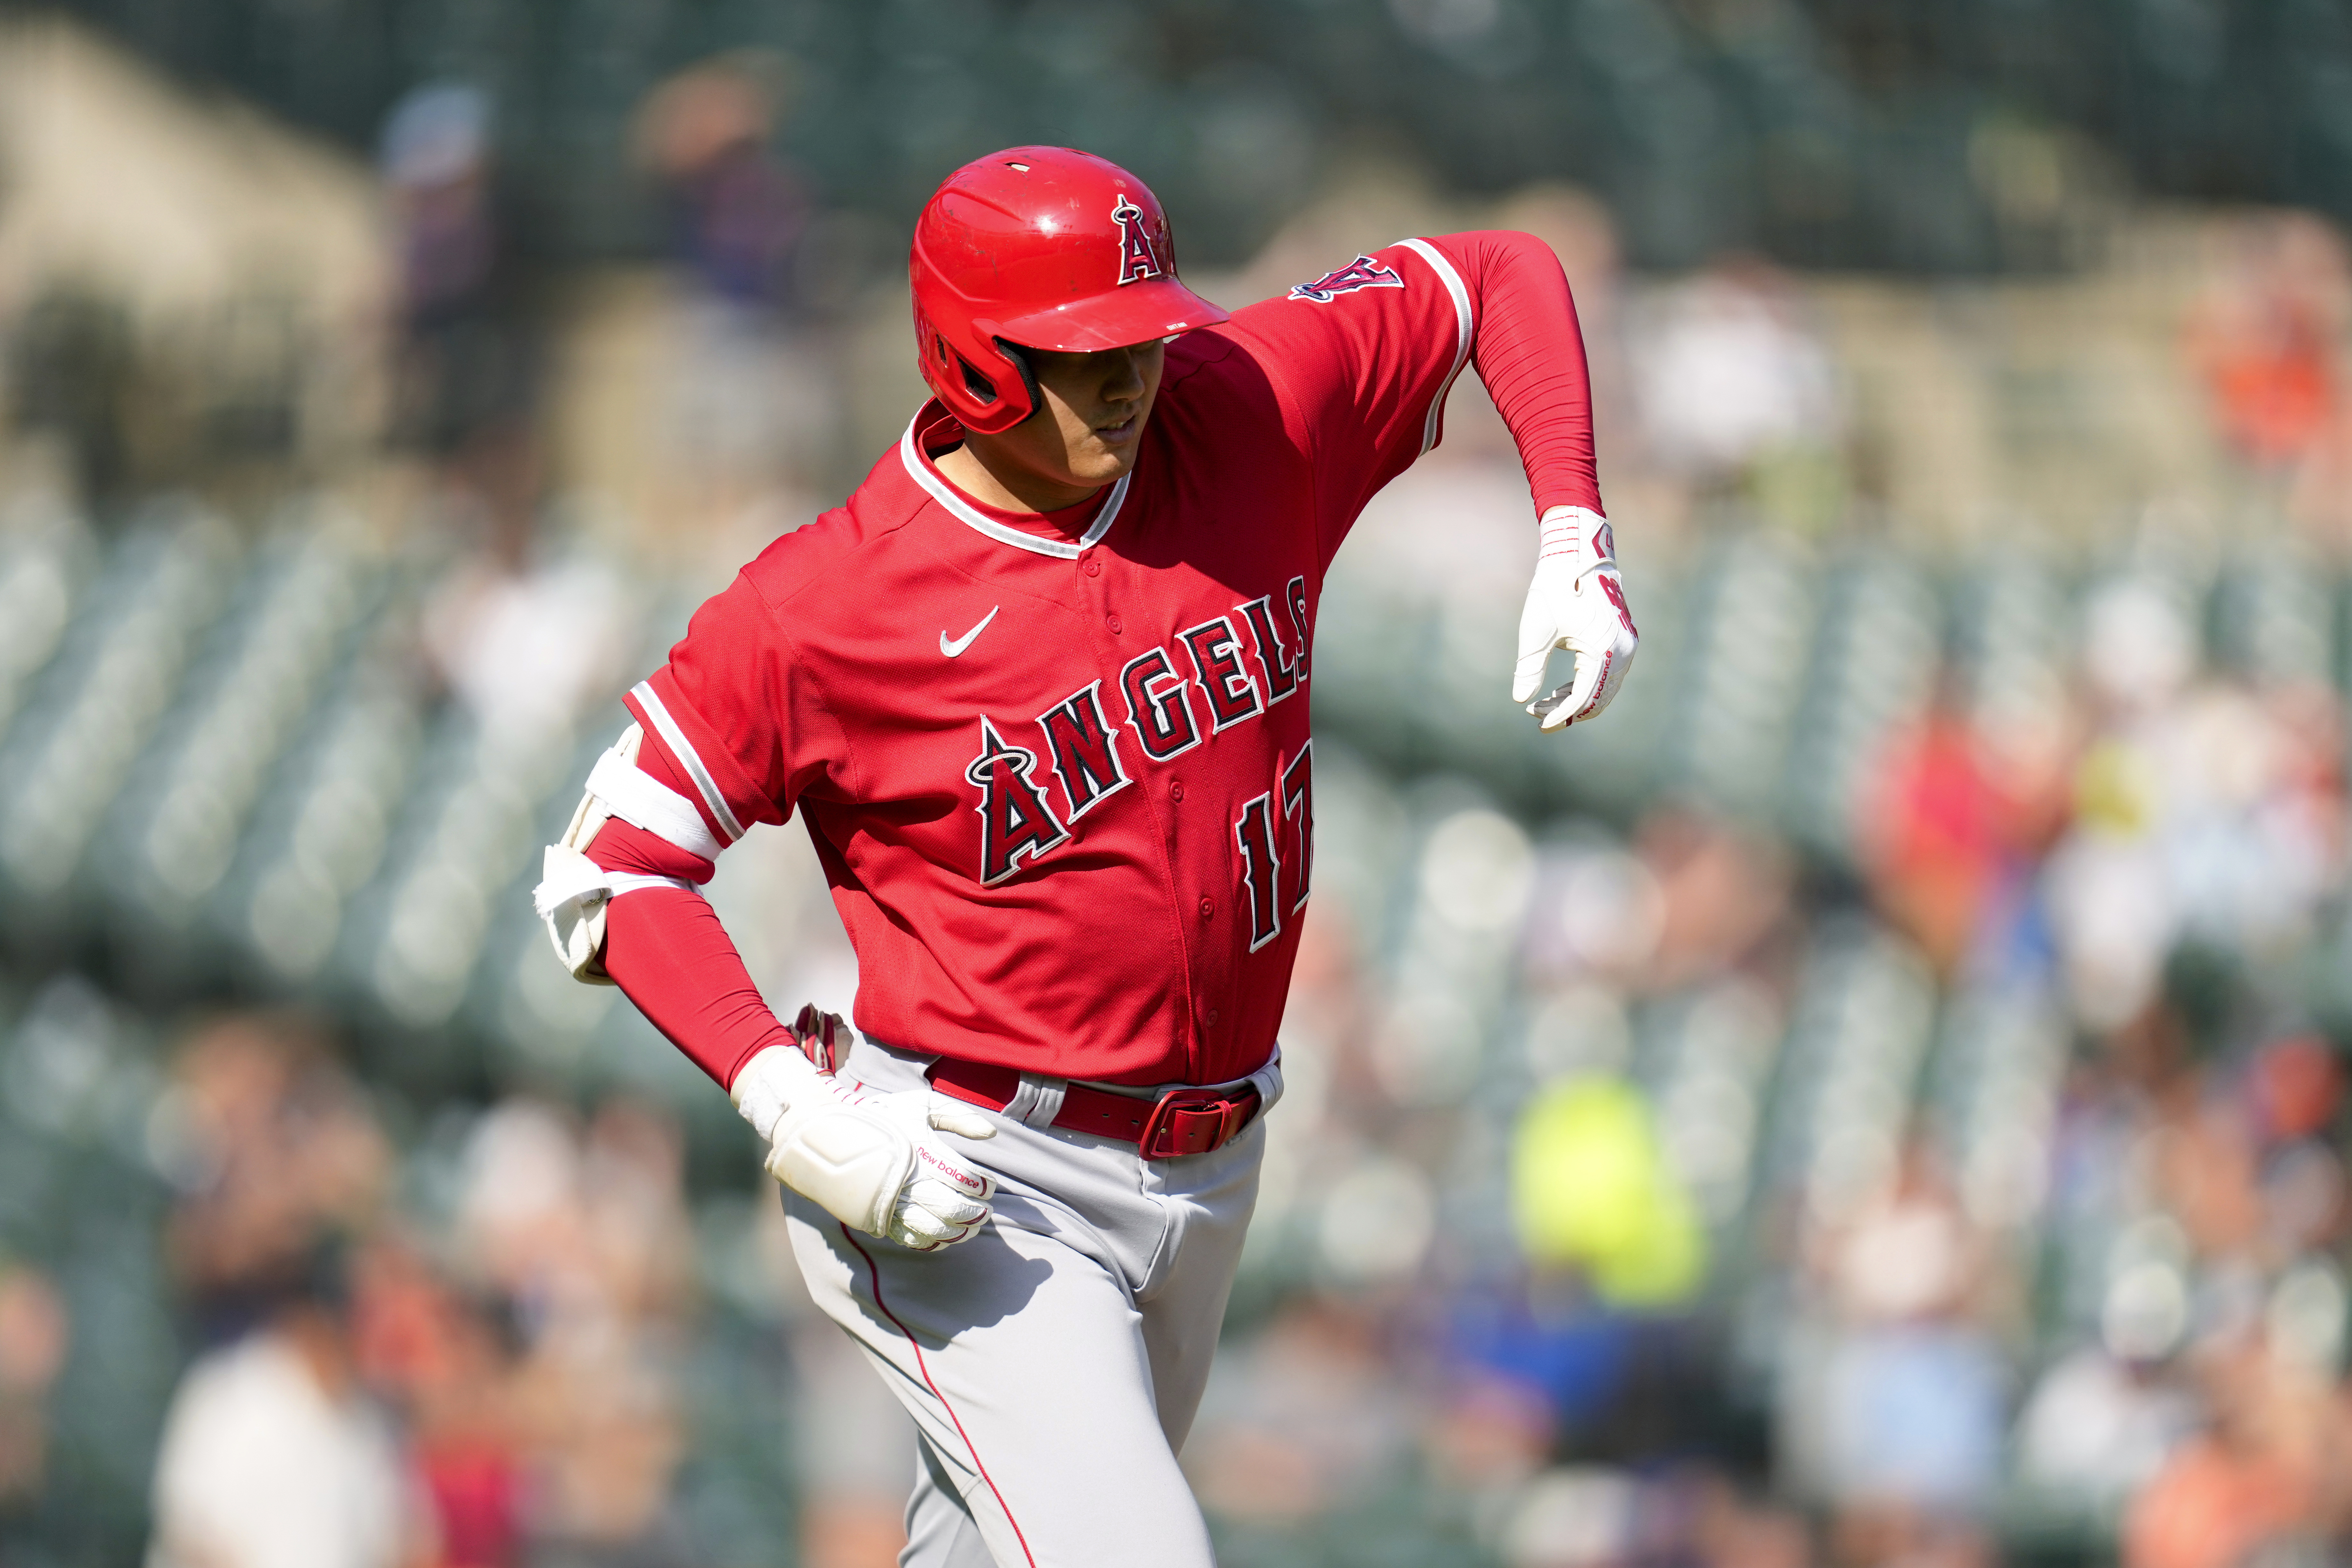 Angels say they won't trade Ohtani. He celebrates with 1-hitter, 2 HRs